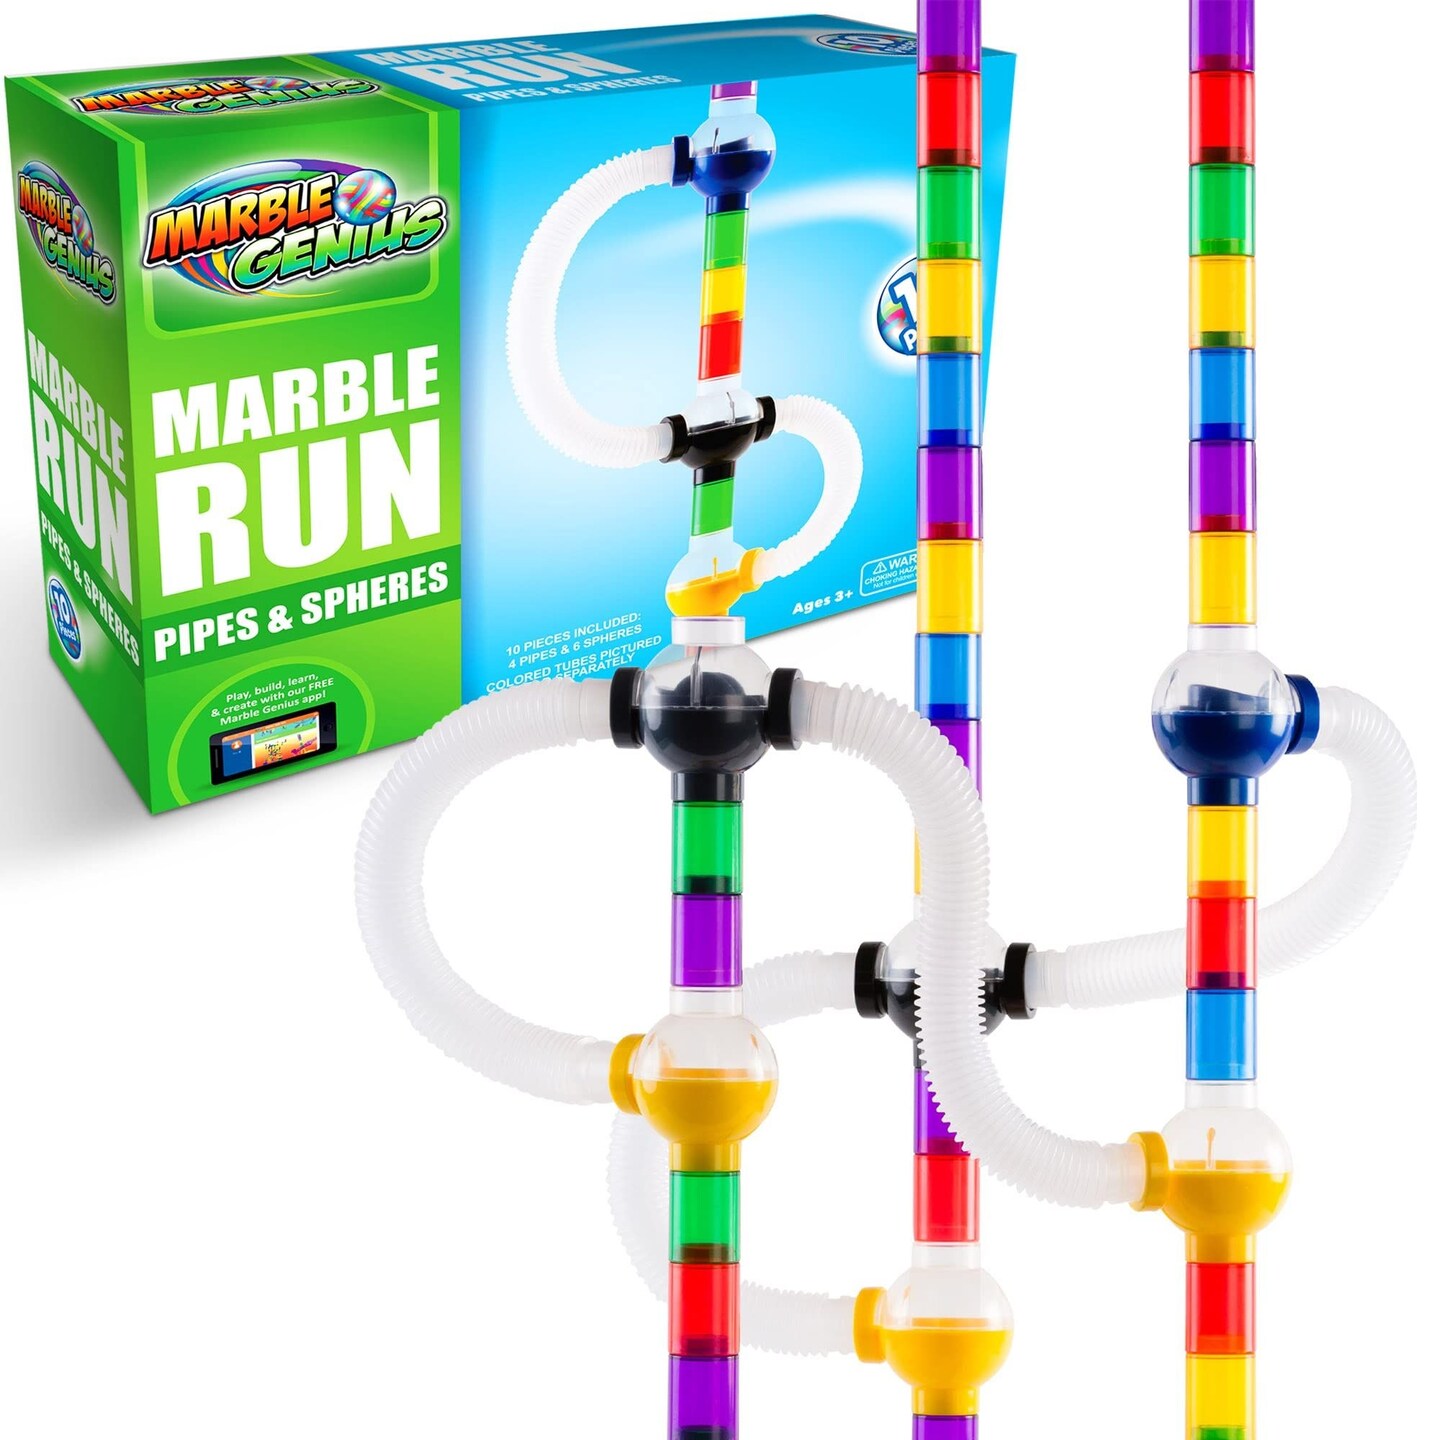 Marble Genius Marble Run Pipes &#x26; Spheres Accessory Add-on Set - 10 Pieces Total (4 Pipes, 1 Ramp Sphere, 1 Alternating Sphere, 1 Straight Sphere, &#x26; 3 Tube Spheres), With Instruction App Access